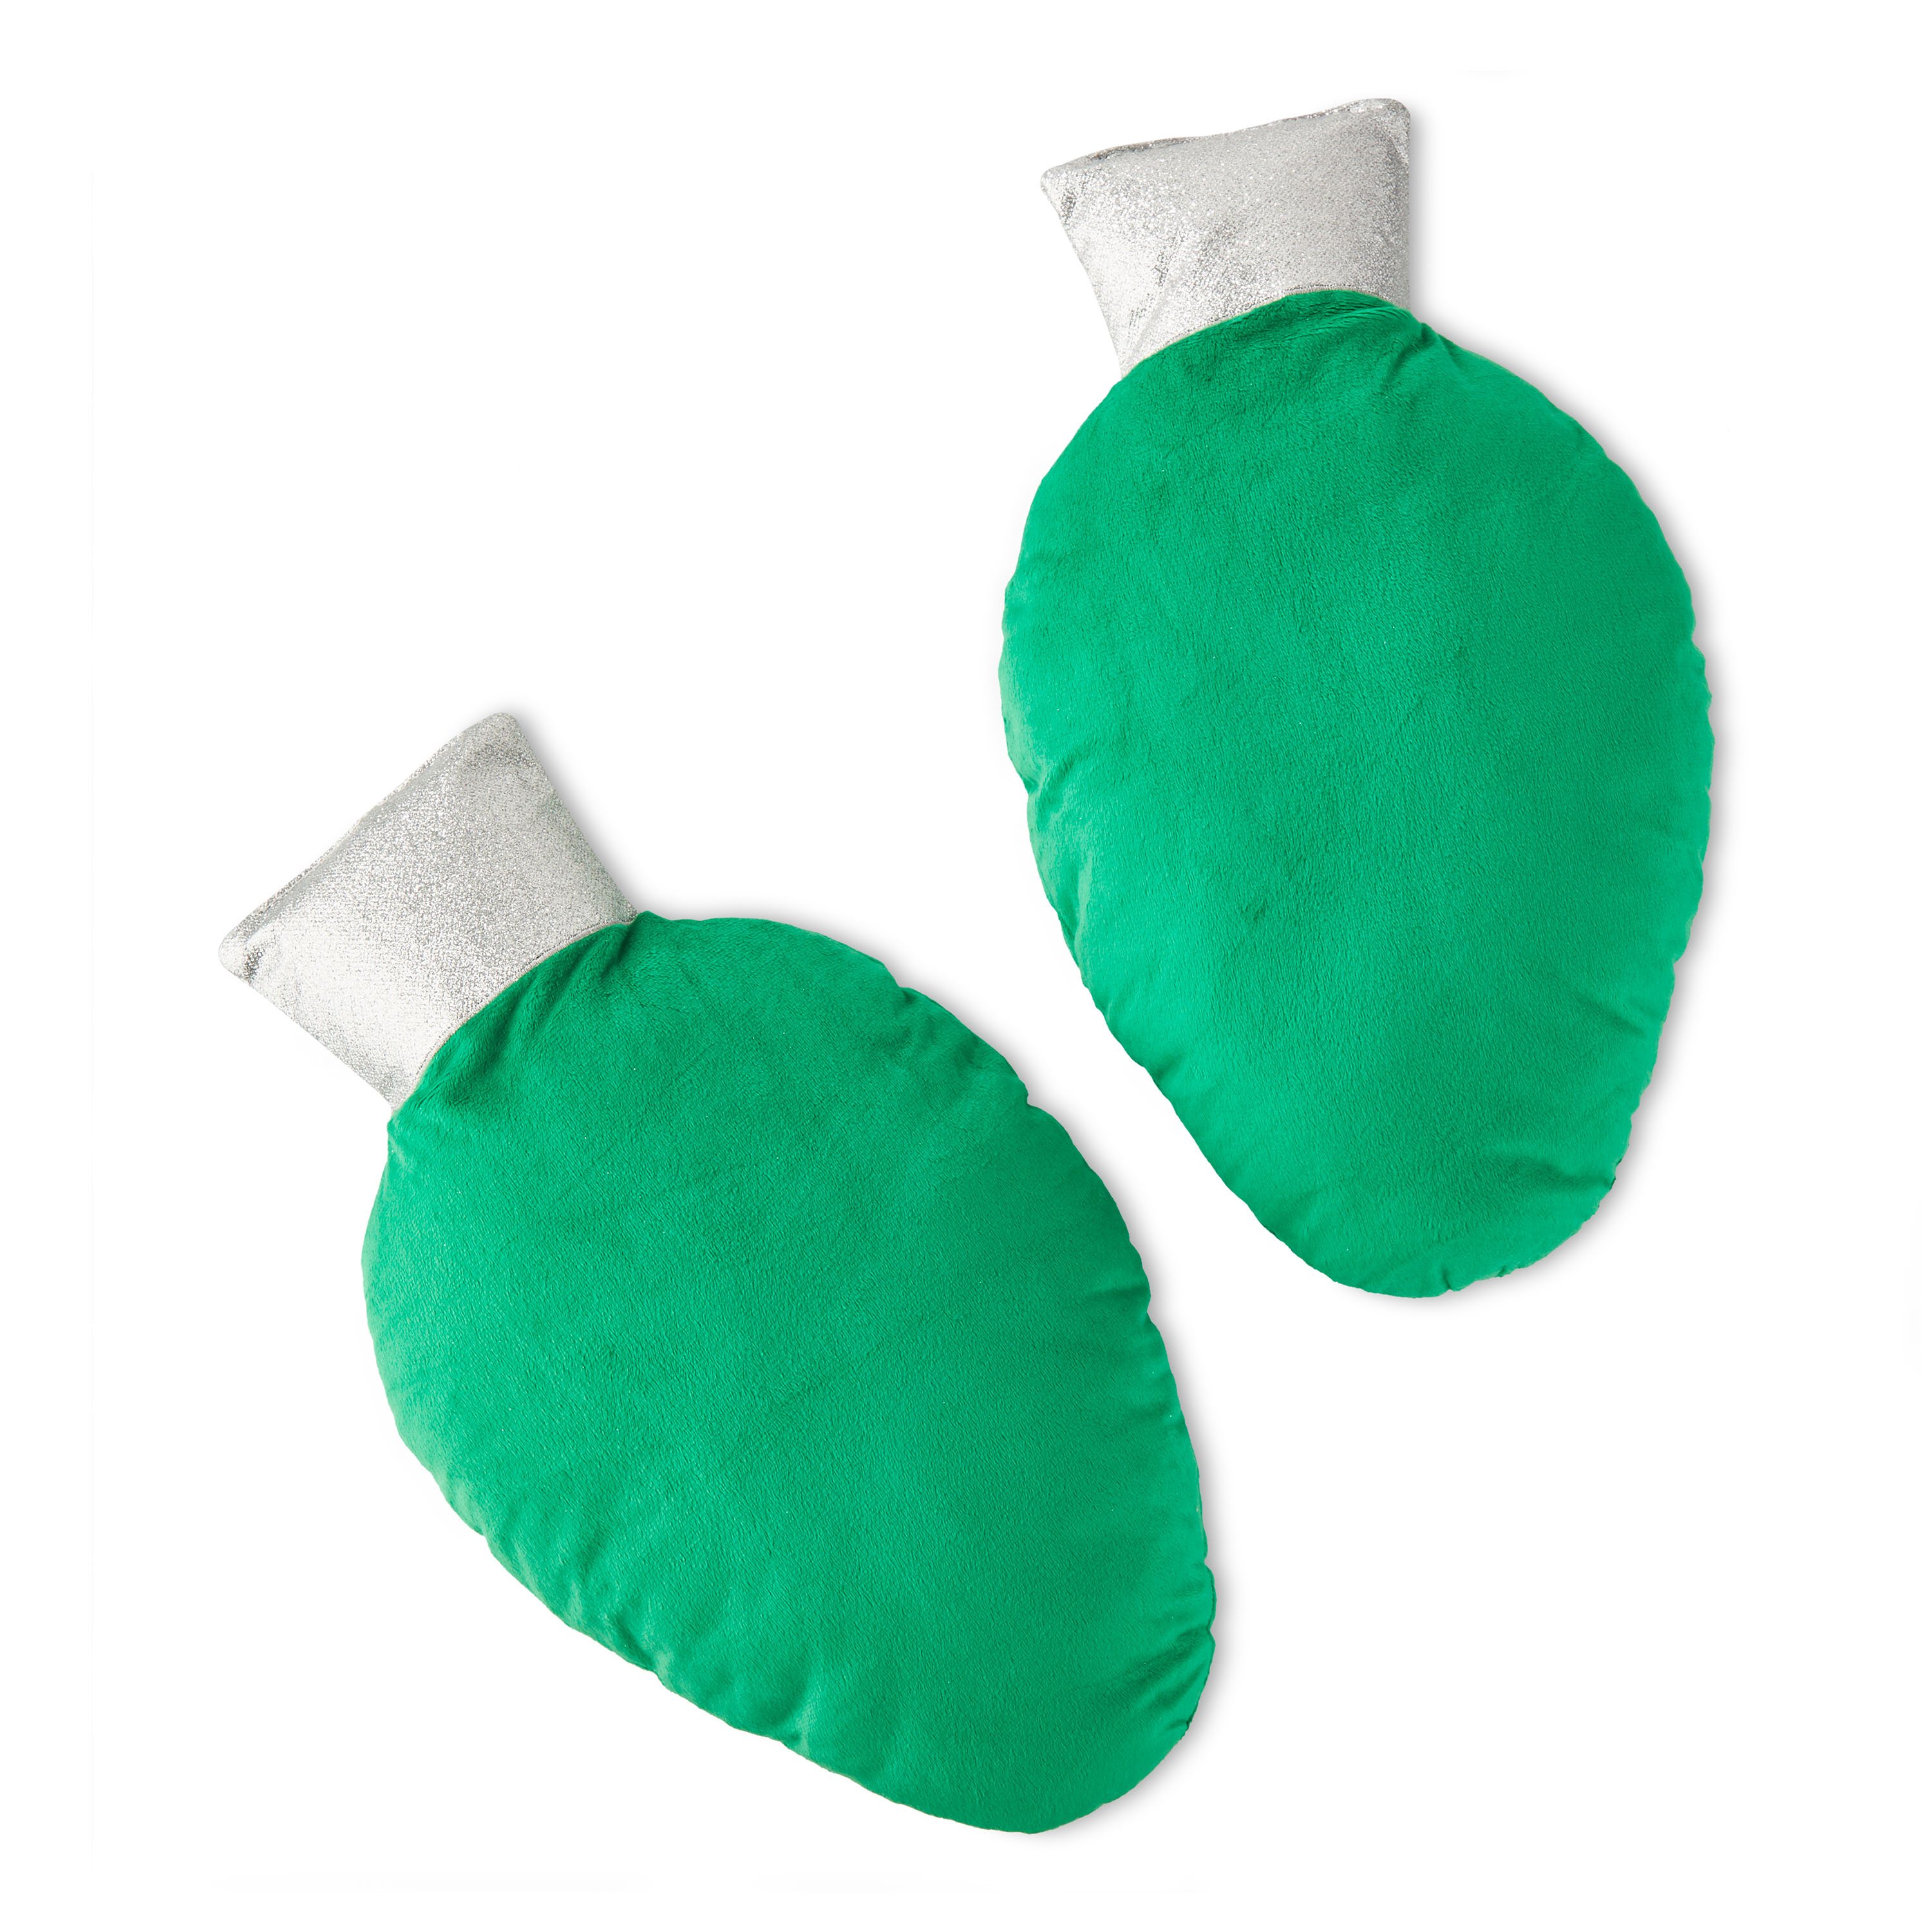 Holiday Time Christmas 15 inch Green C9 Bulb Decorative Pillows Plush, 2-pack - image 1 of 6